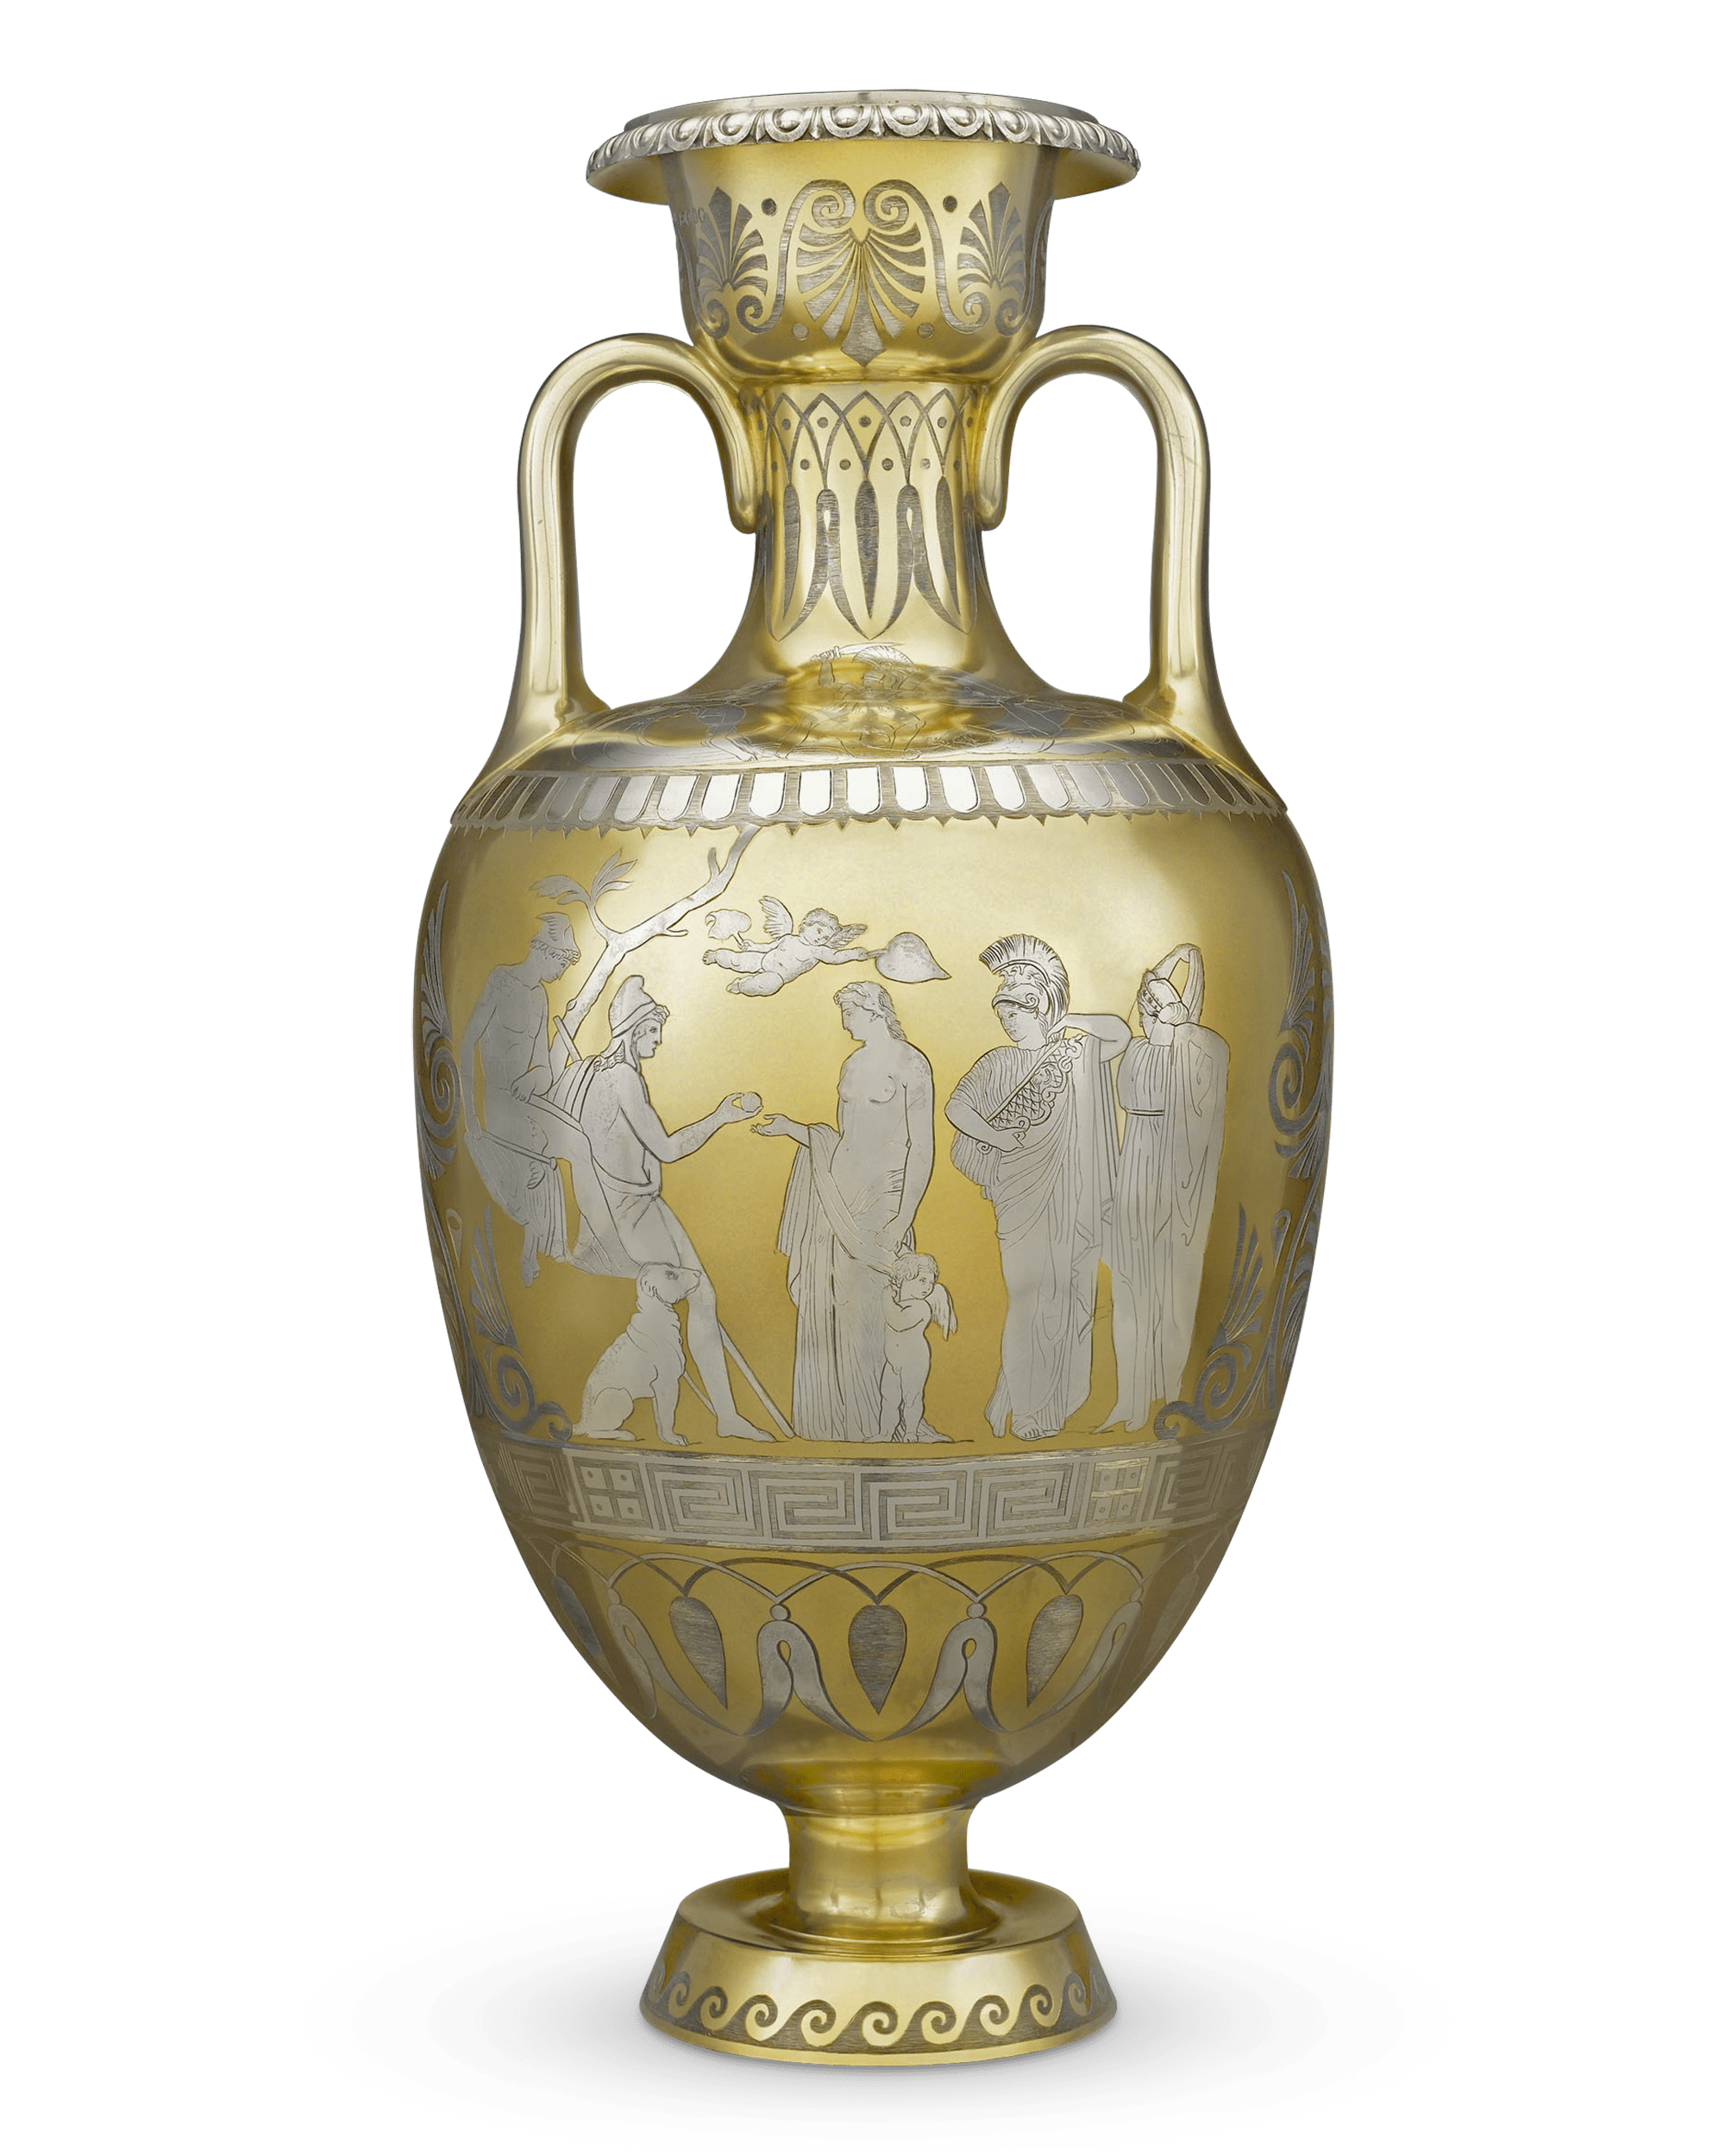 This magnificent Victorian silver urn exhibits exceptional parcel-gilding